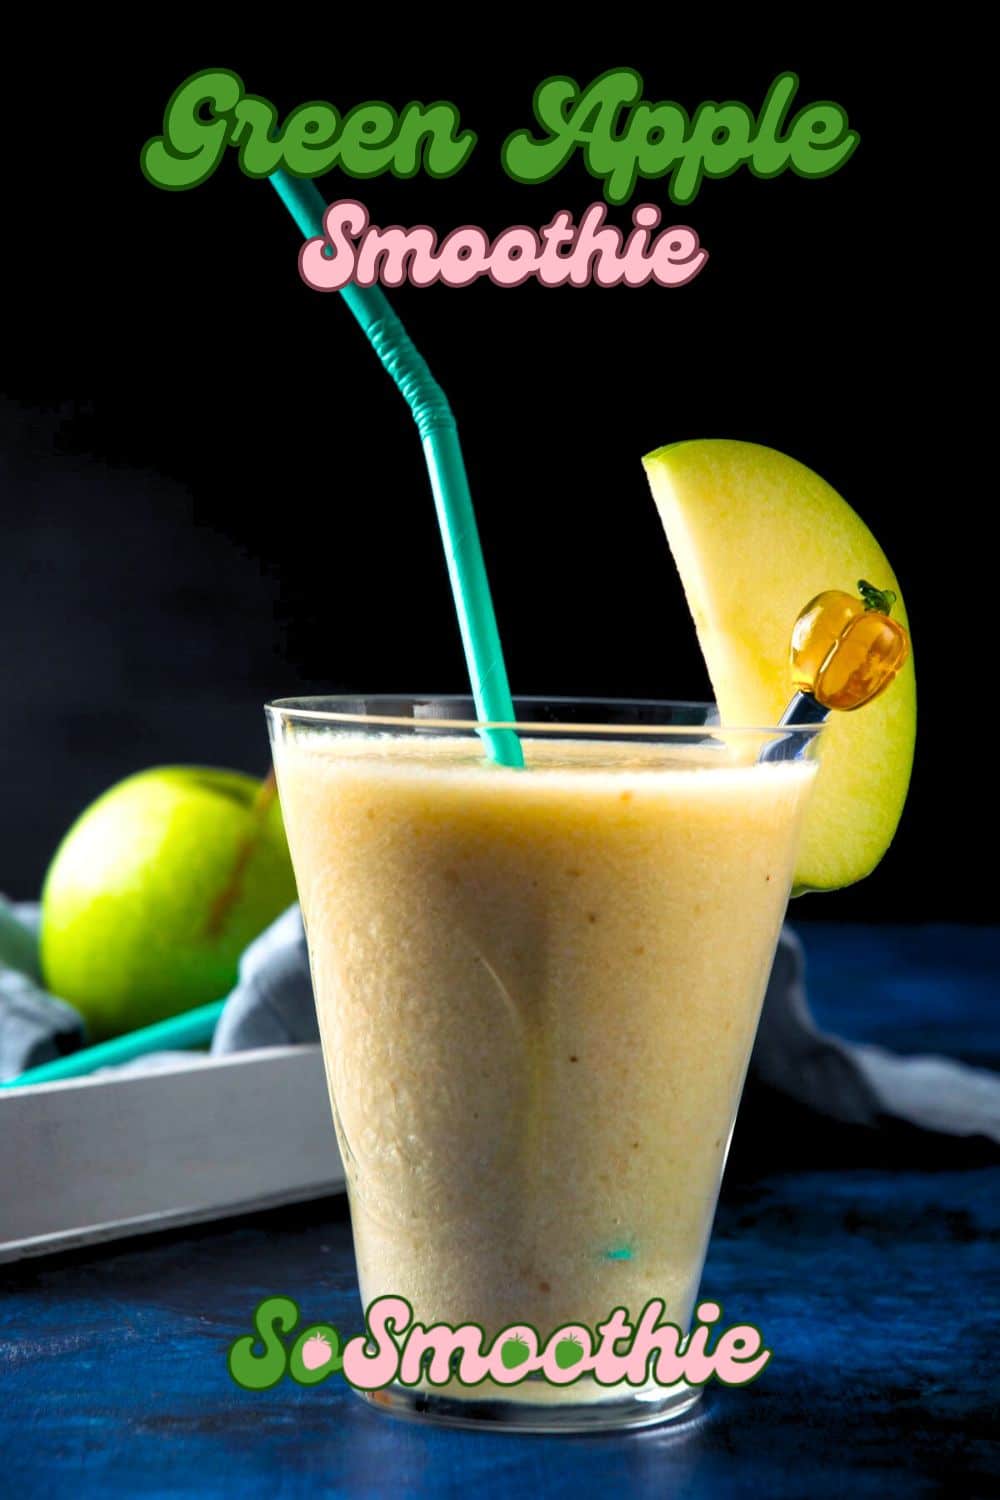 Green apple smoothie in glass with blue straw and apple slice, black background.